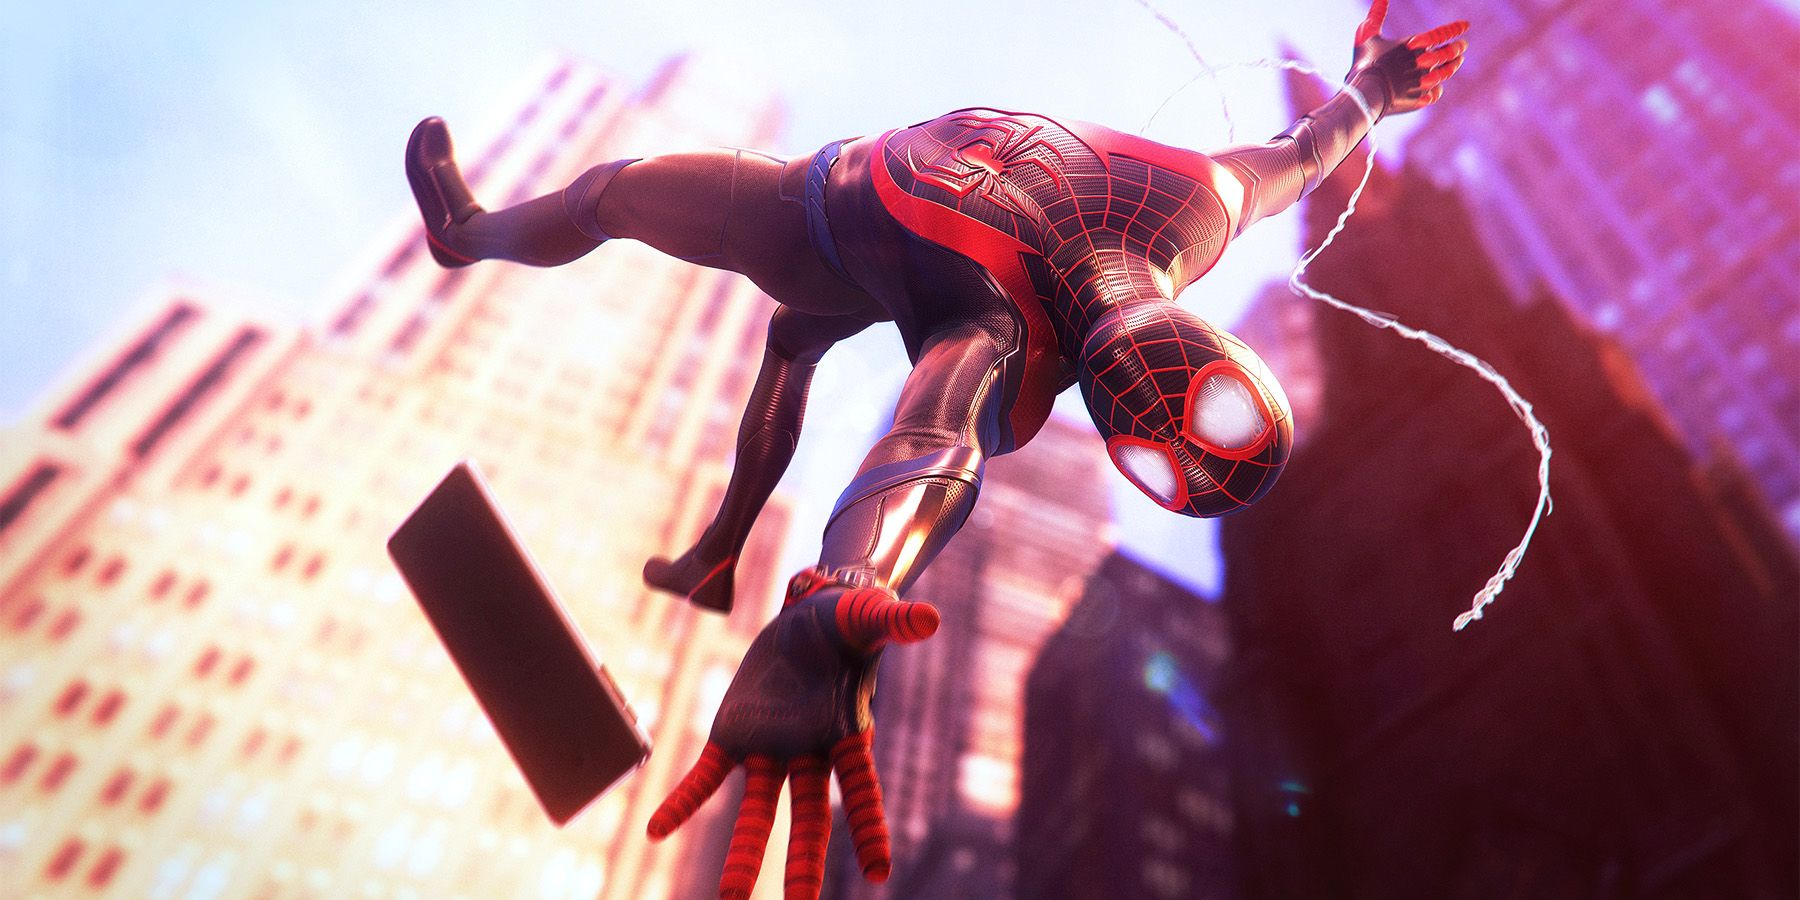 Marvel's Spider Man 2' game falls short of greatness – The Quinnipiac  Chronicle